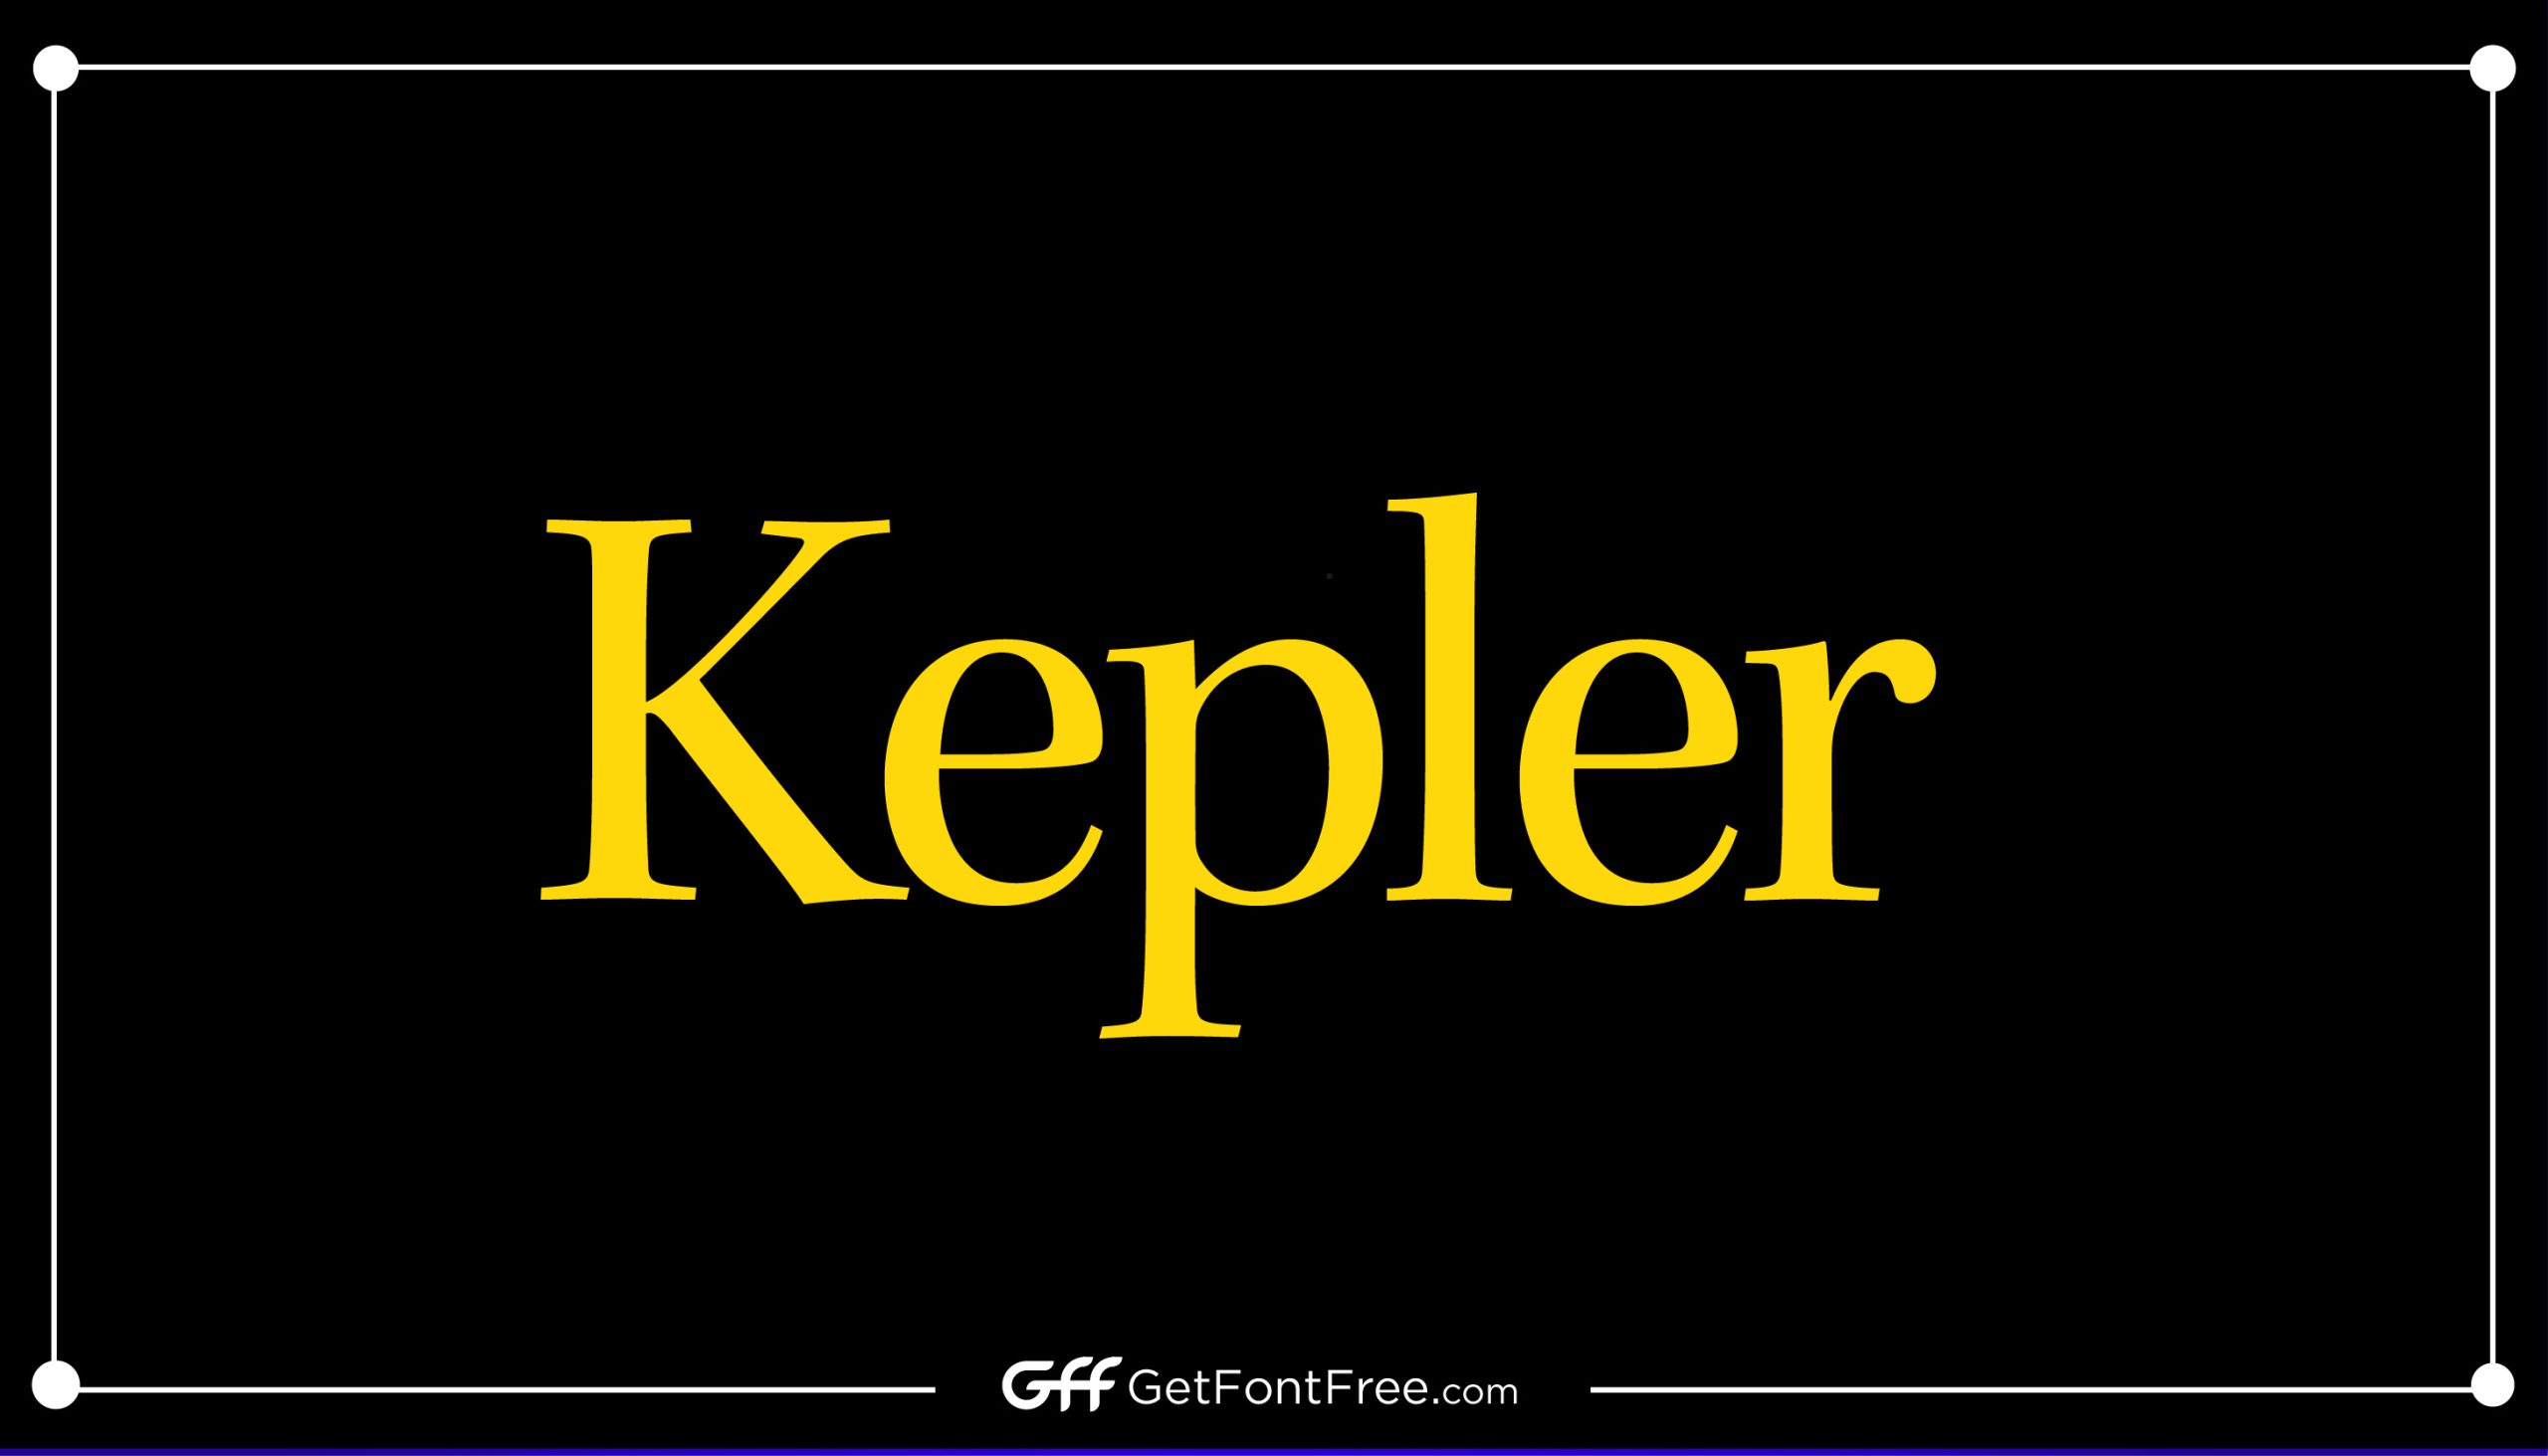 Kepler Font is a serif typeface designed by Robert Slimbach and released by Adobe in 1991. It is named after Johannes Kepler, a German mathematician, and astronomer. Their design of Kepler is influenced by the typefaces used in 16th-century publications in Germany, such as those by Johannes Kepler himself. The font has since become a popular choice for book design and other text-heavy applications.